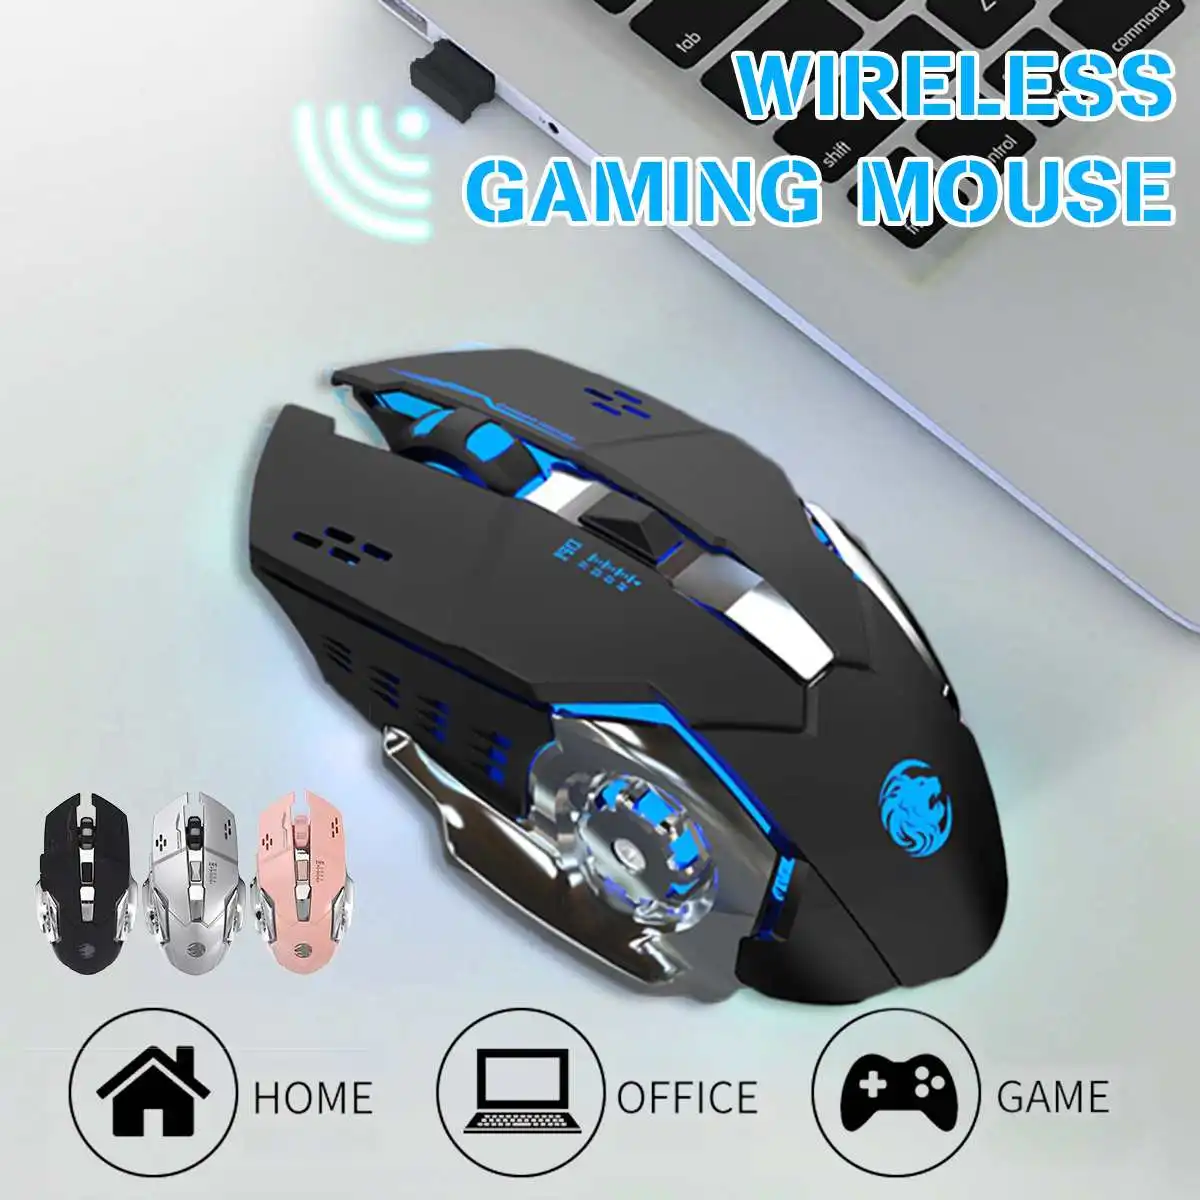 

Wireless 2.4G USB Gaming Mouse Rechargeable 1600DPI RGB LED Backlit Rechargeable Silent Mute Mice For PC Laptop Ergonomic Mouse